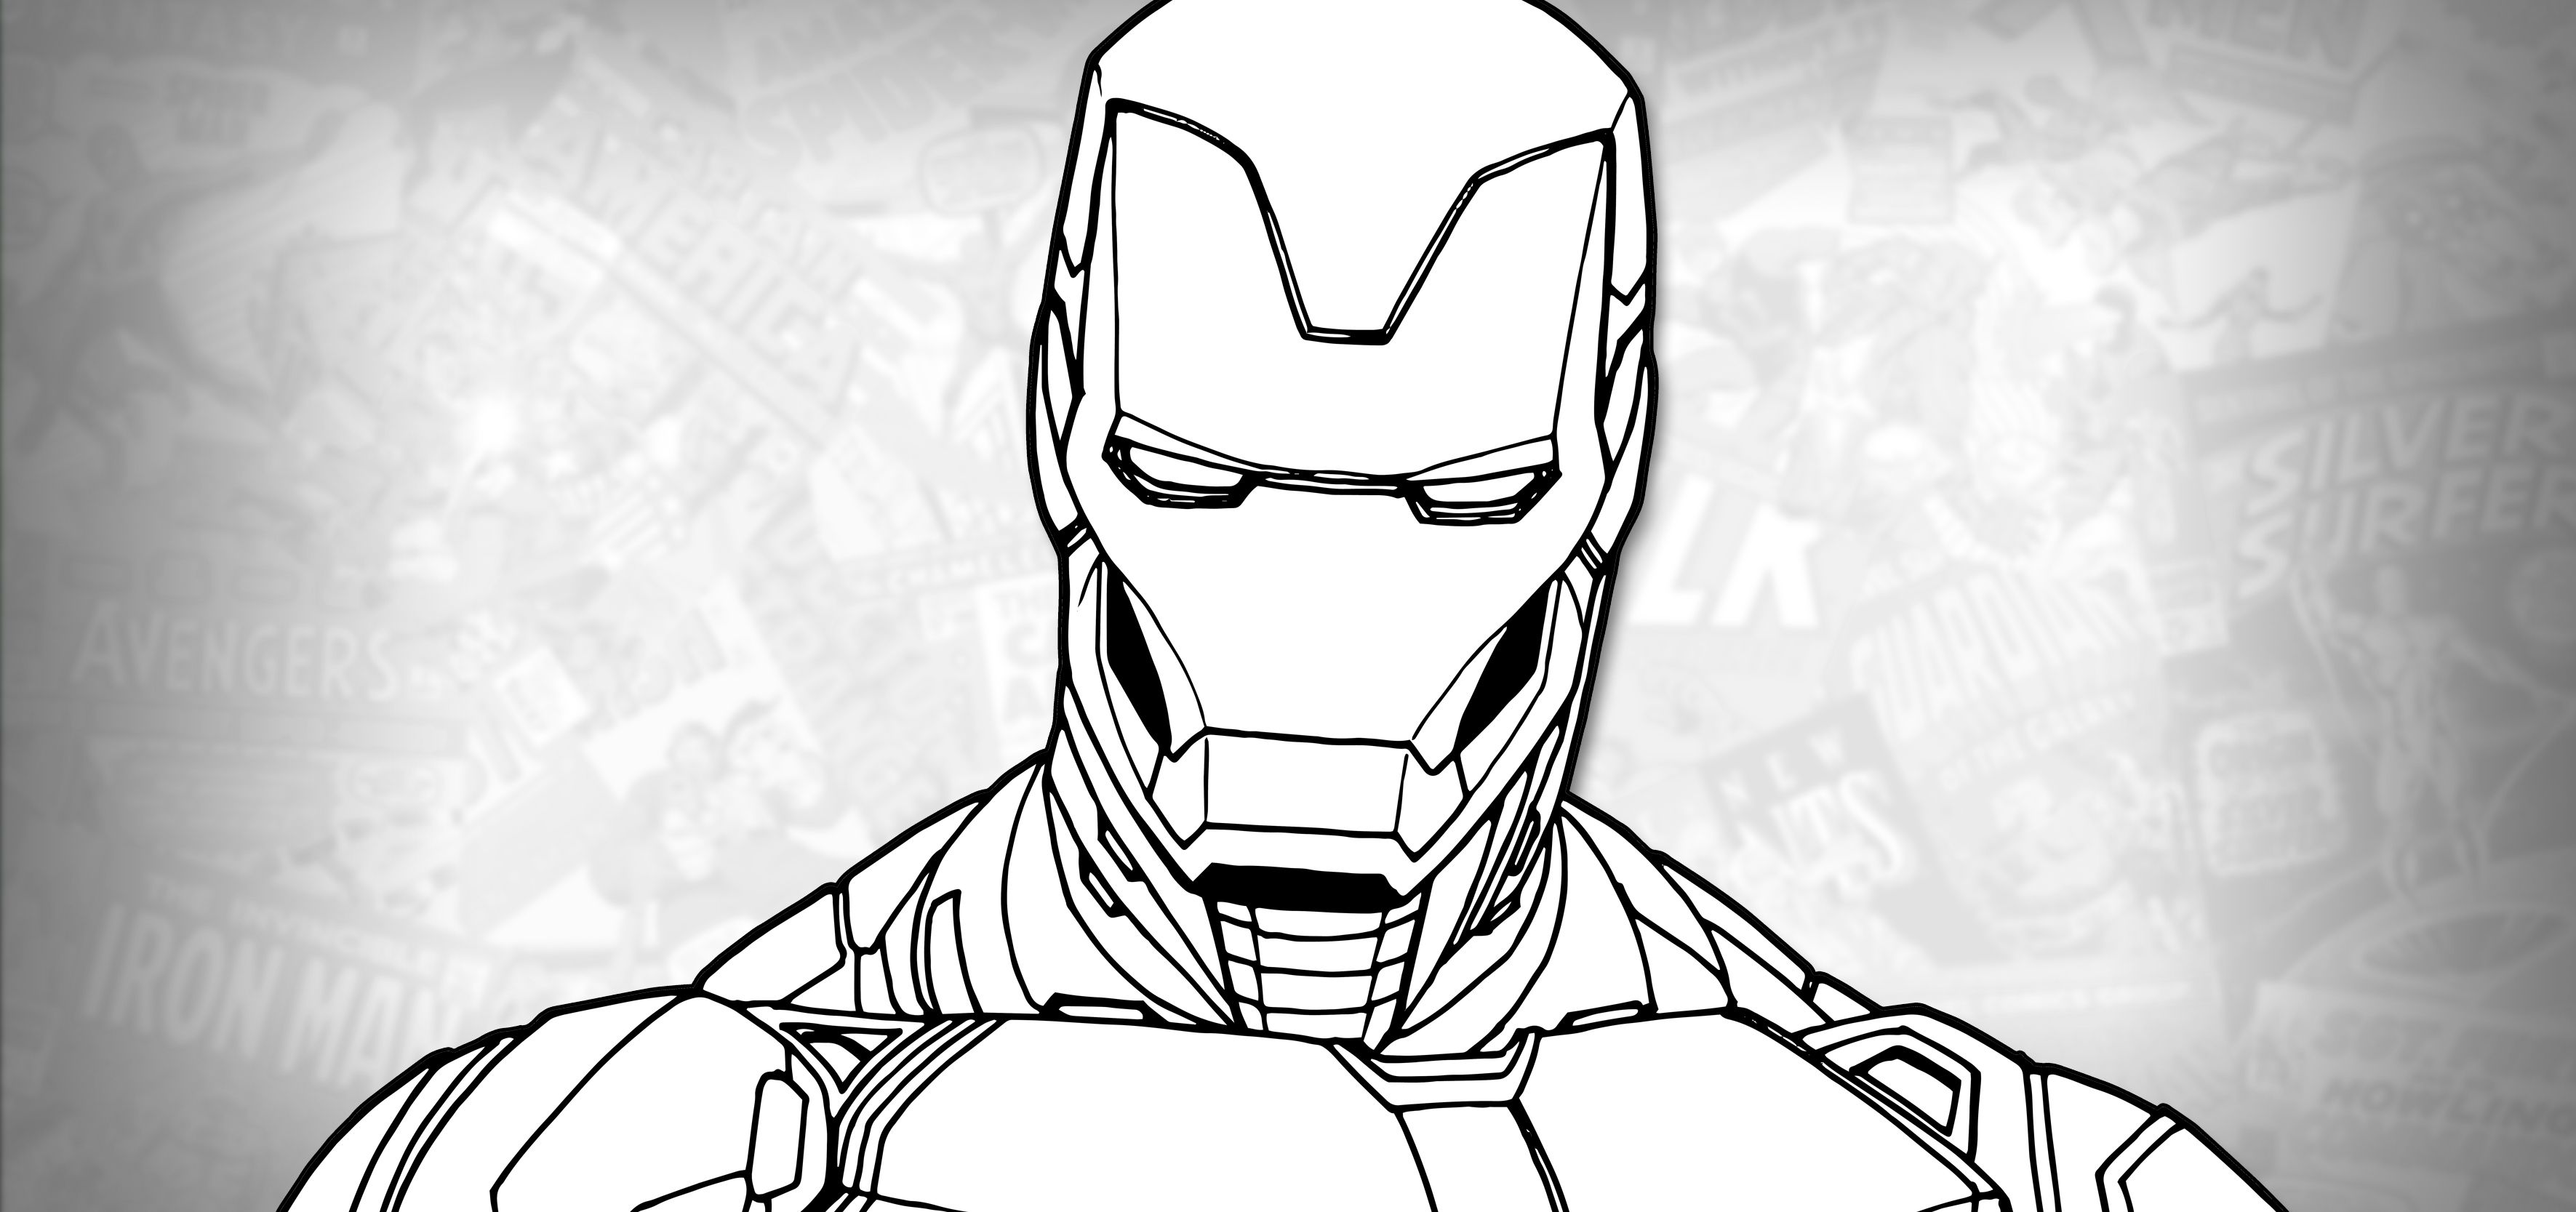 Iron Man Image HD For Drawing. Mister .misteropoetico.blogspot.com